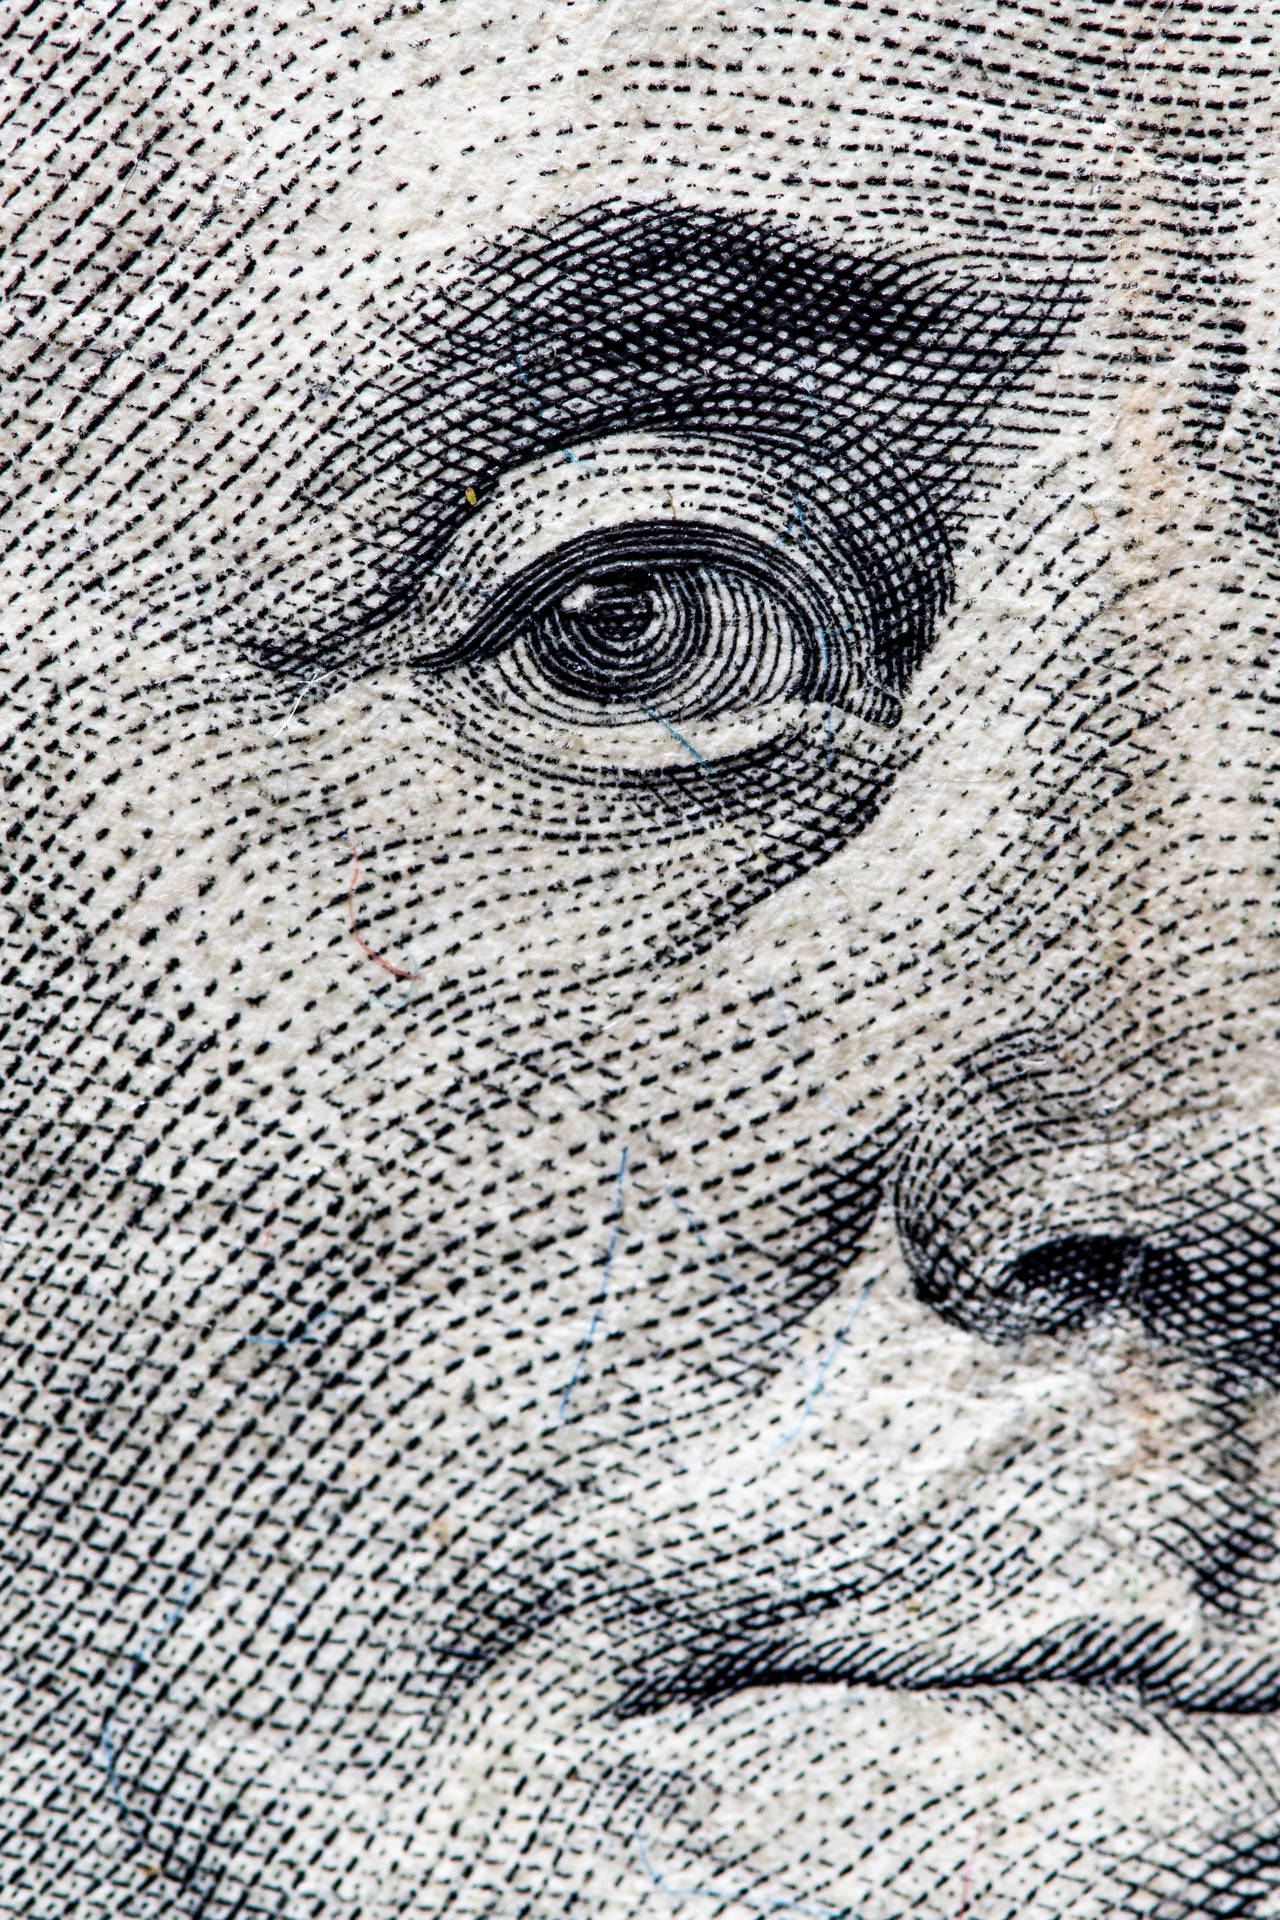 Money 3224X4836 Wallpaper and Background Image